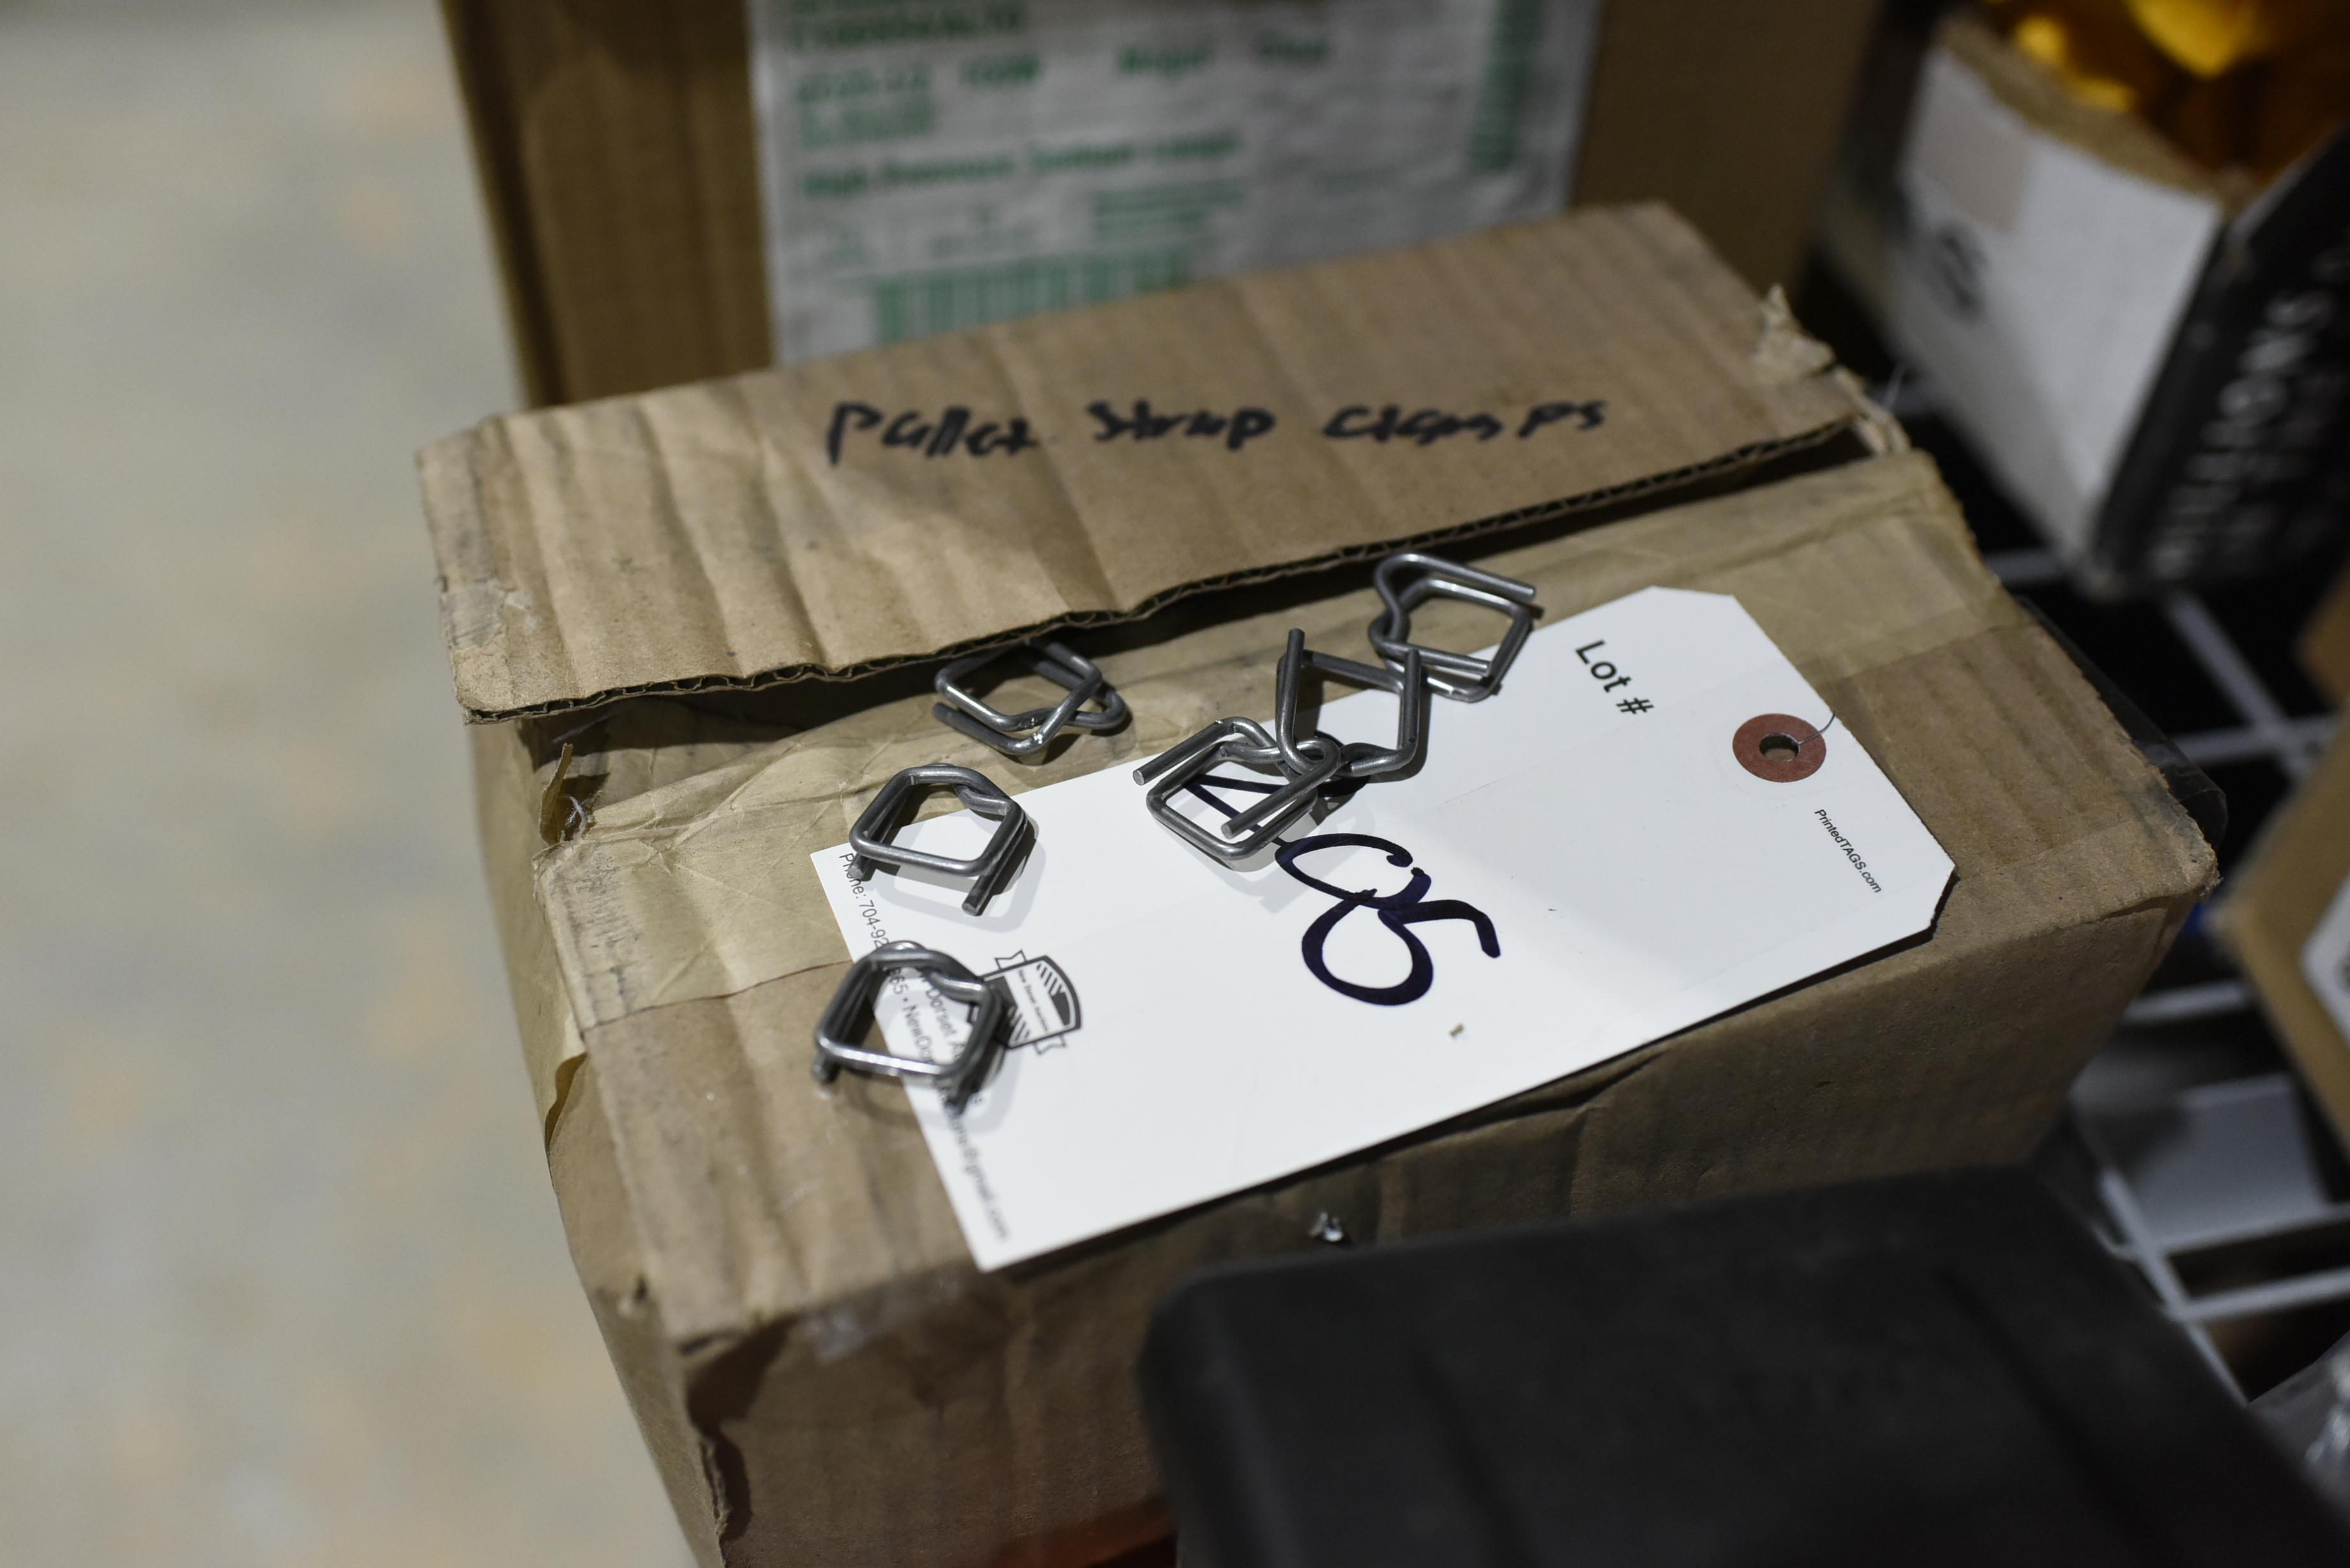 Box of Pallet Strapping Clamps